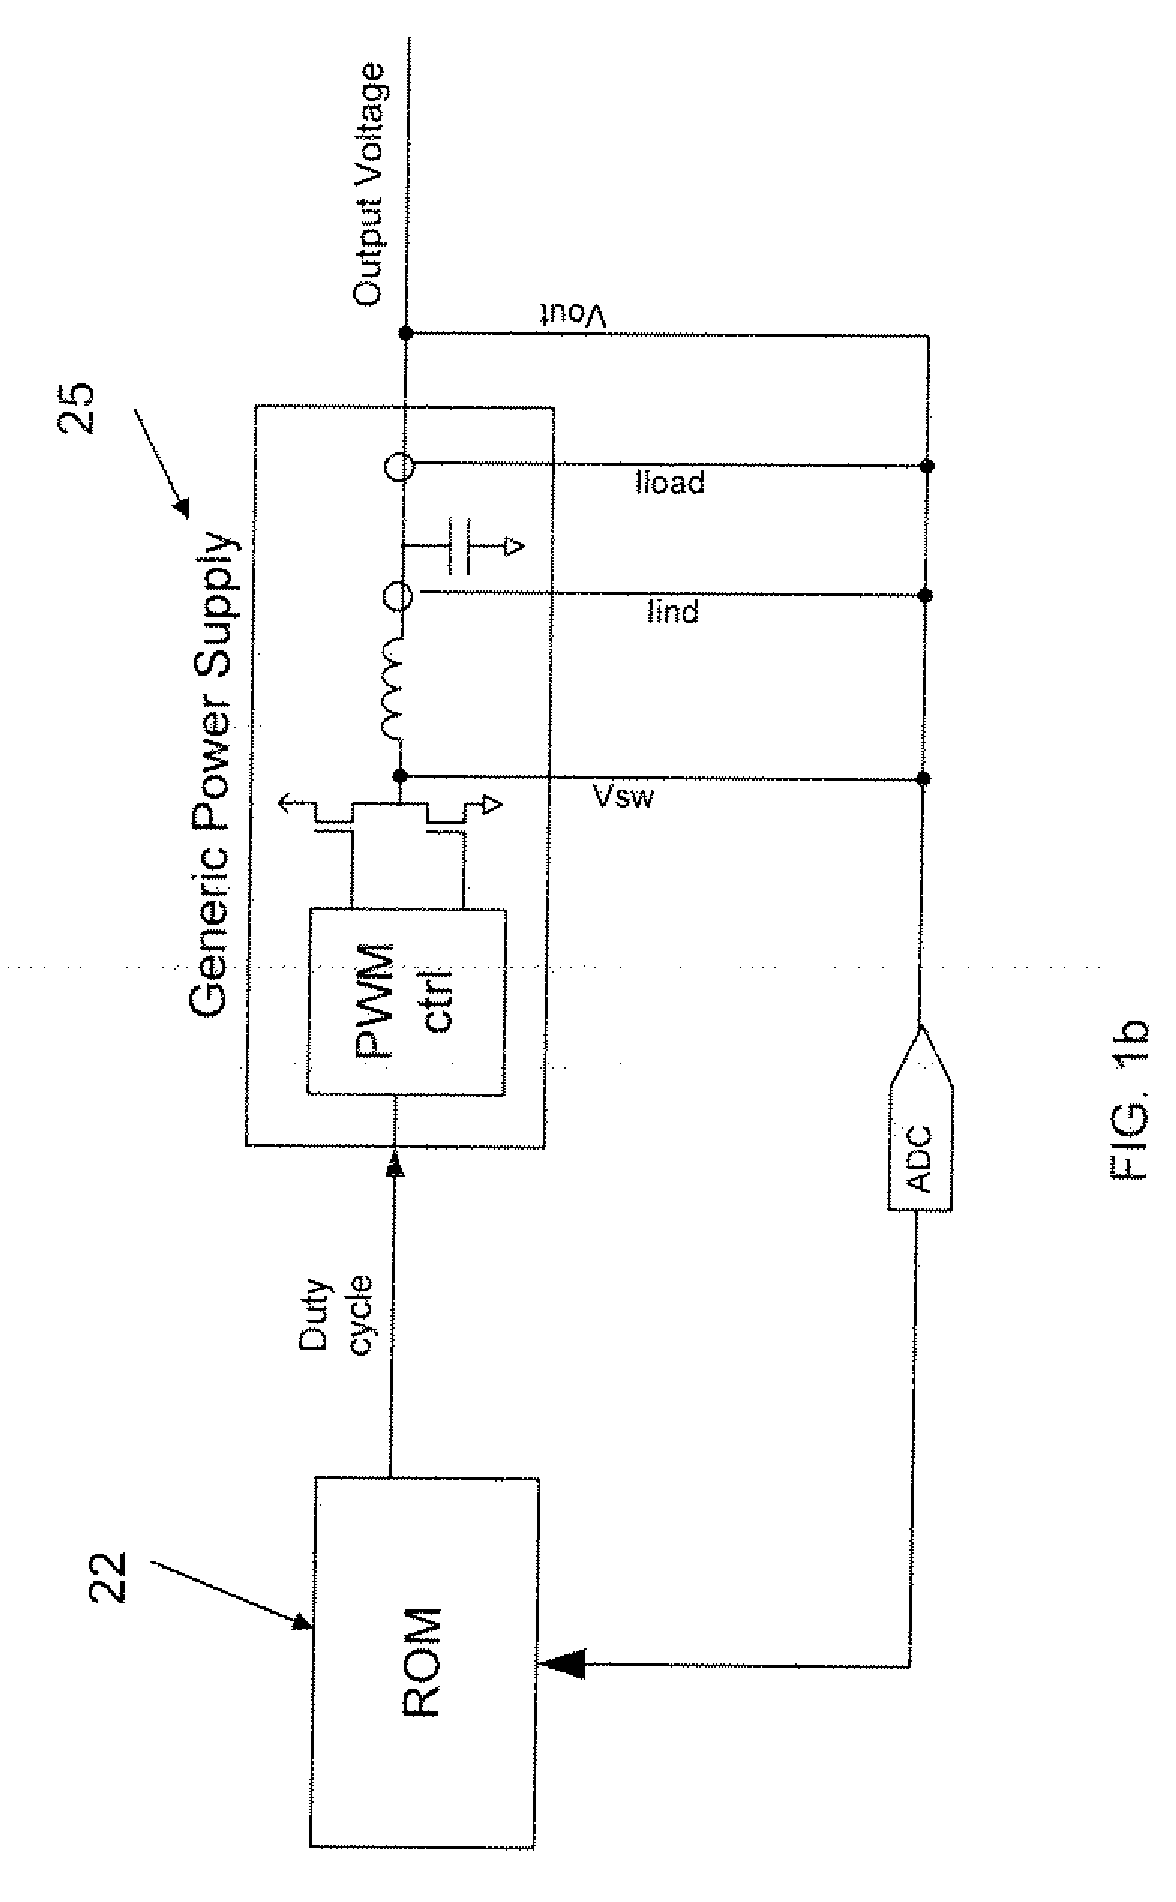 Non-linear PWM controller for dc-to-dc converters